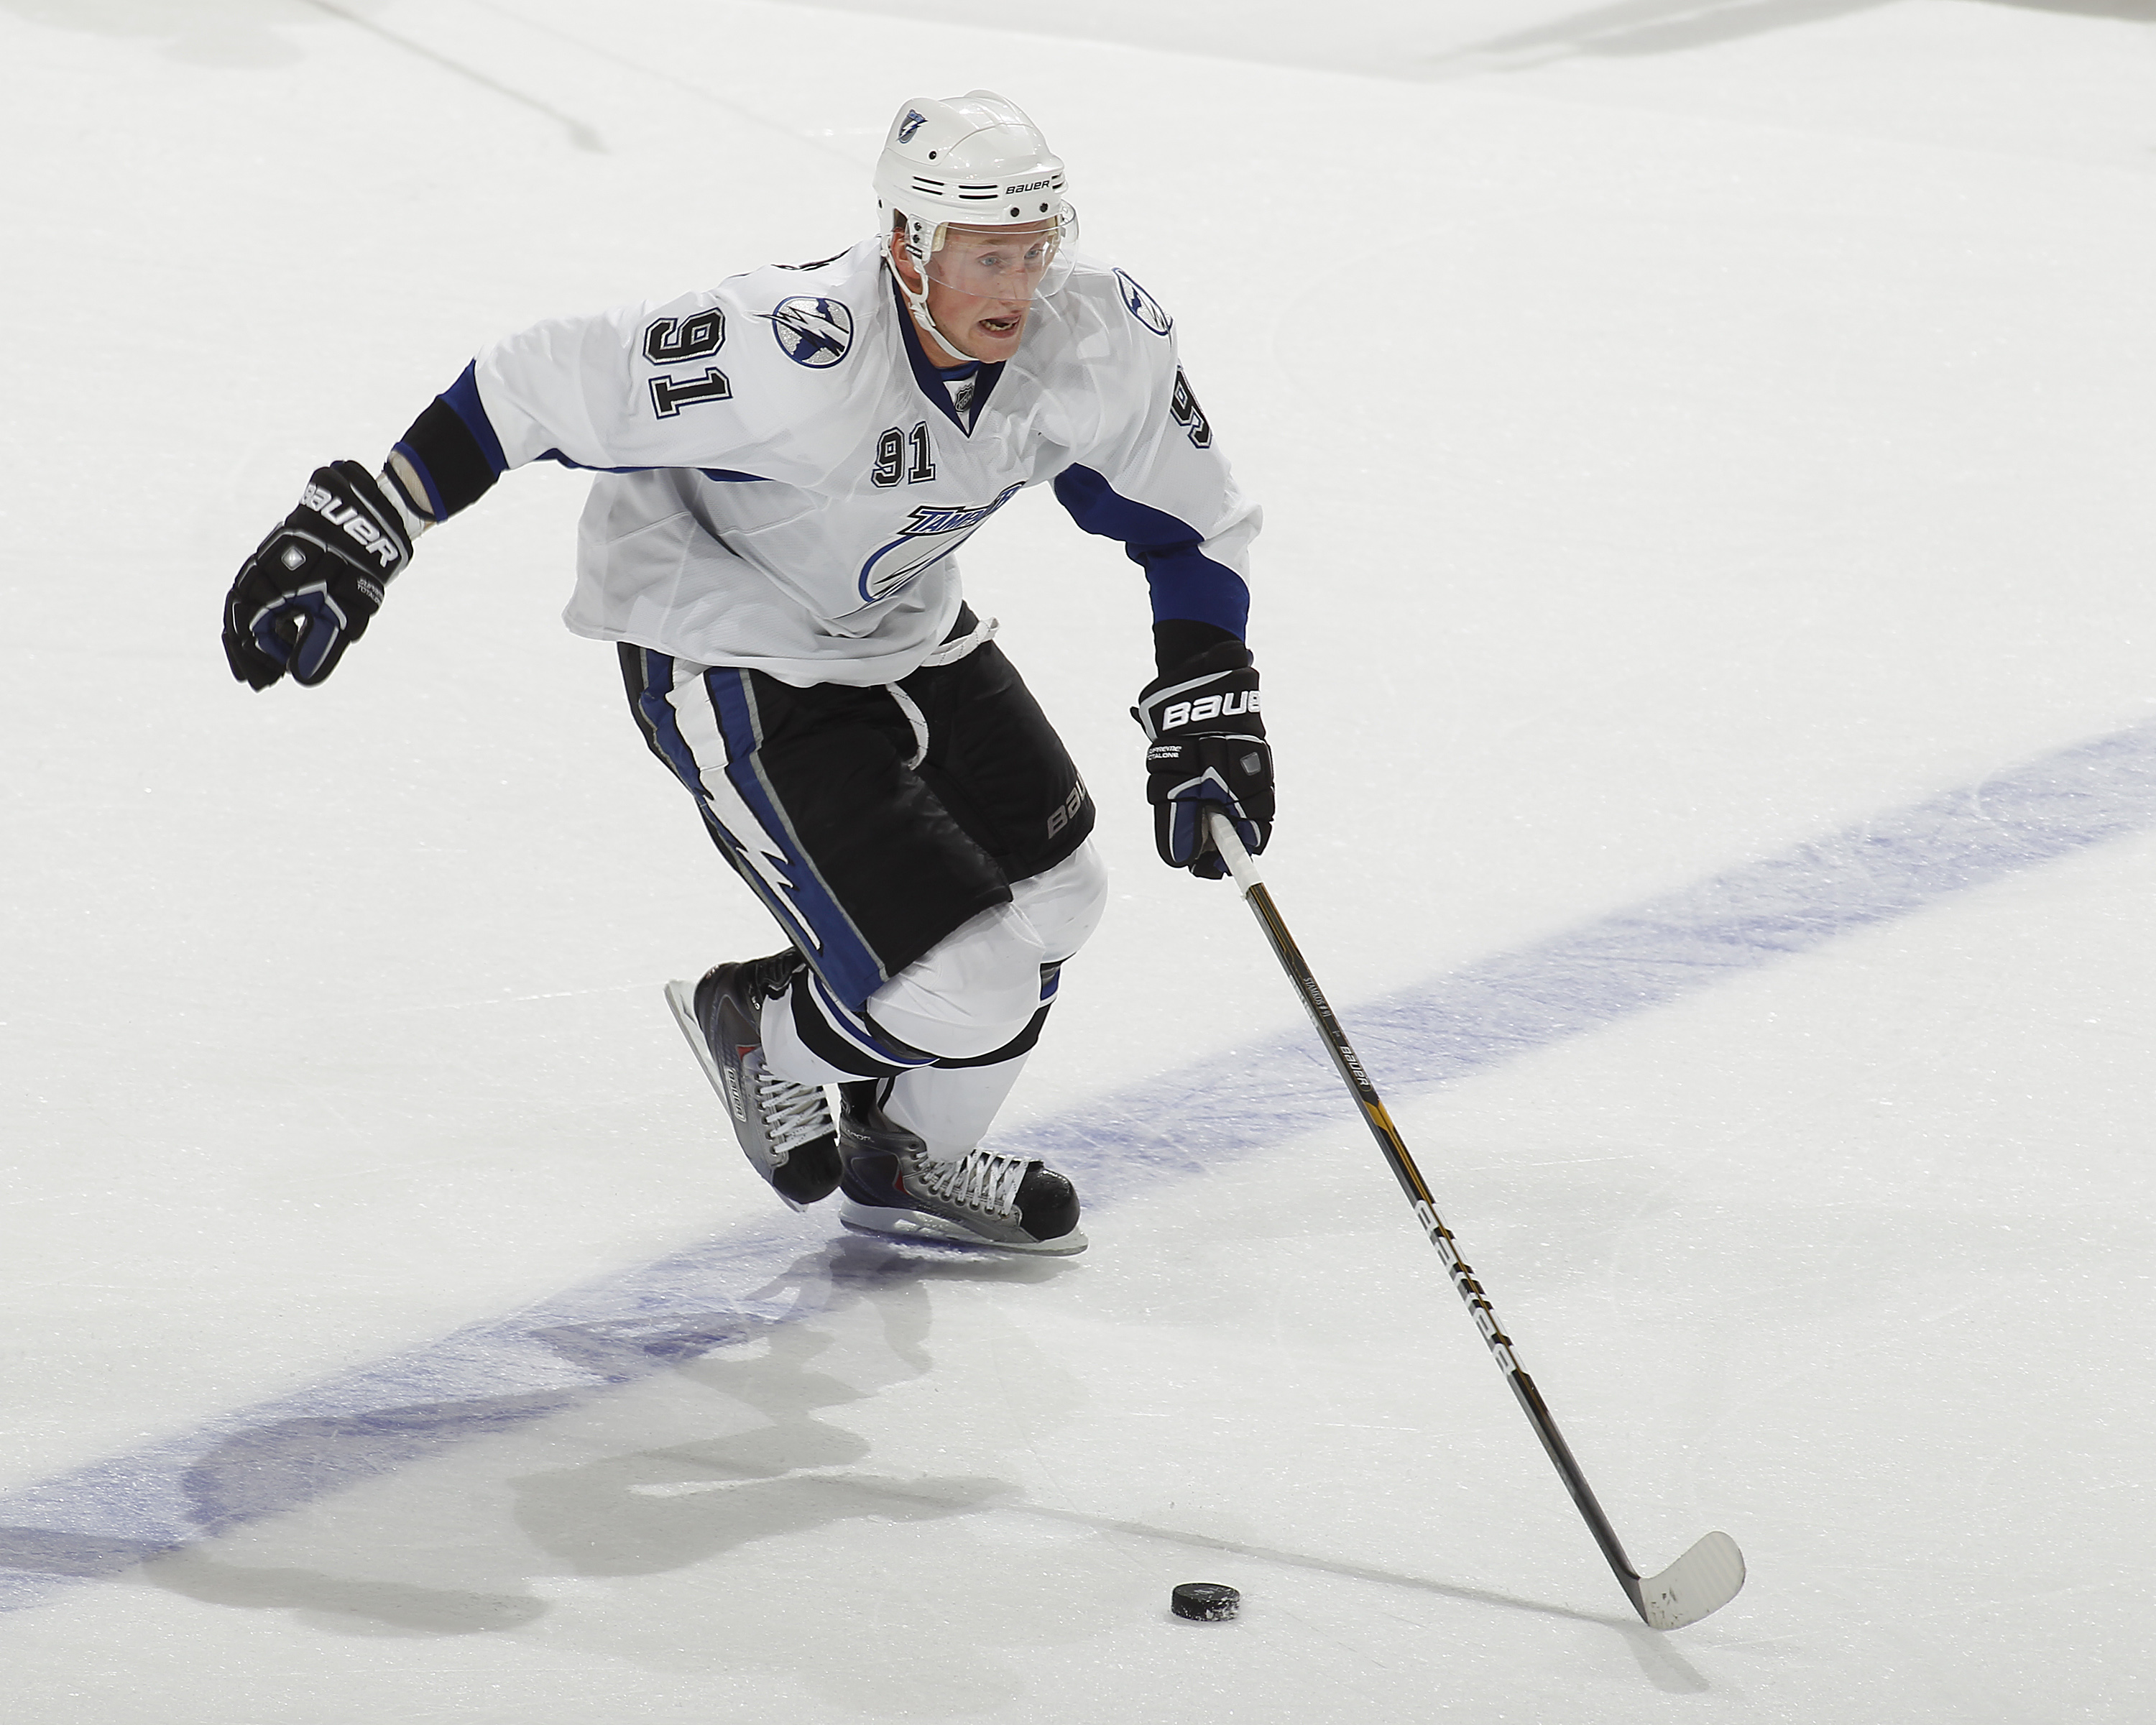 SUNRISE, FL - OCTOBER 1: Steven Stamkos #91 of the Tampa Bay Lightning caries the puck over the blue line against the Florida Panthers during a pre season game on October 1, 2010 at the BankAtlantic Center in Sunrise, Florida. The Lightning defeated the P